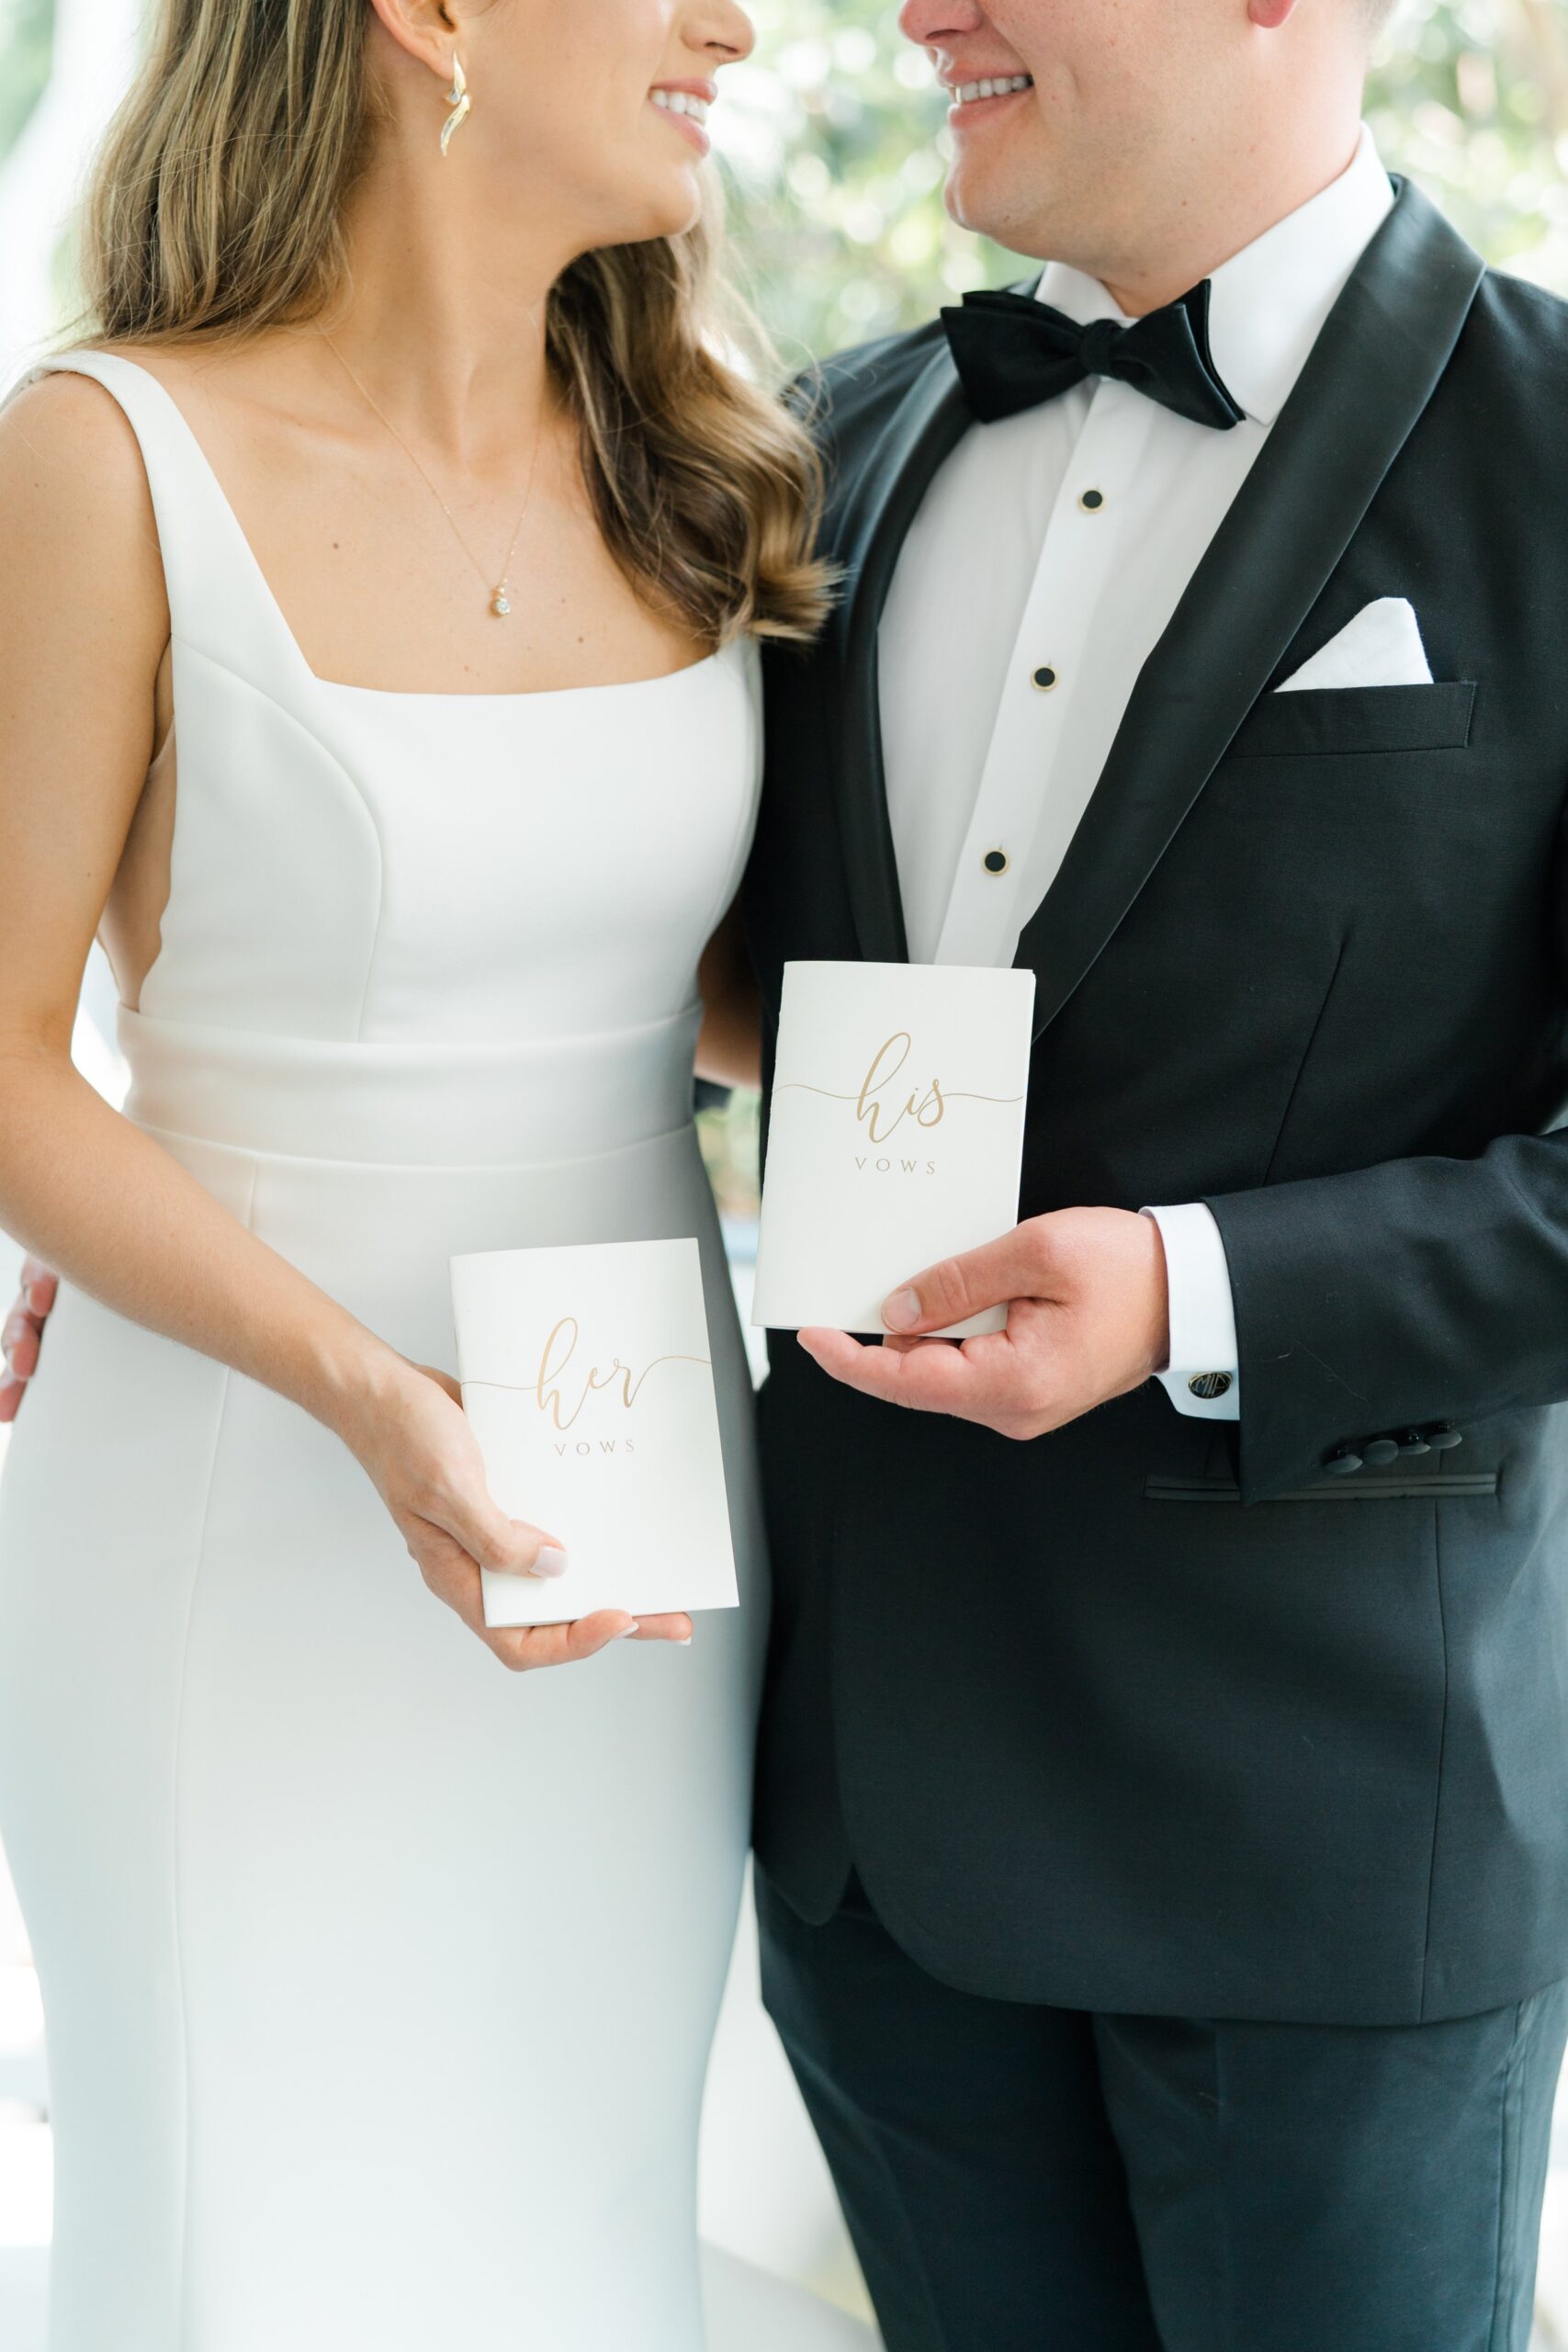 Charleston bride and groom personal vows.